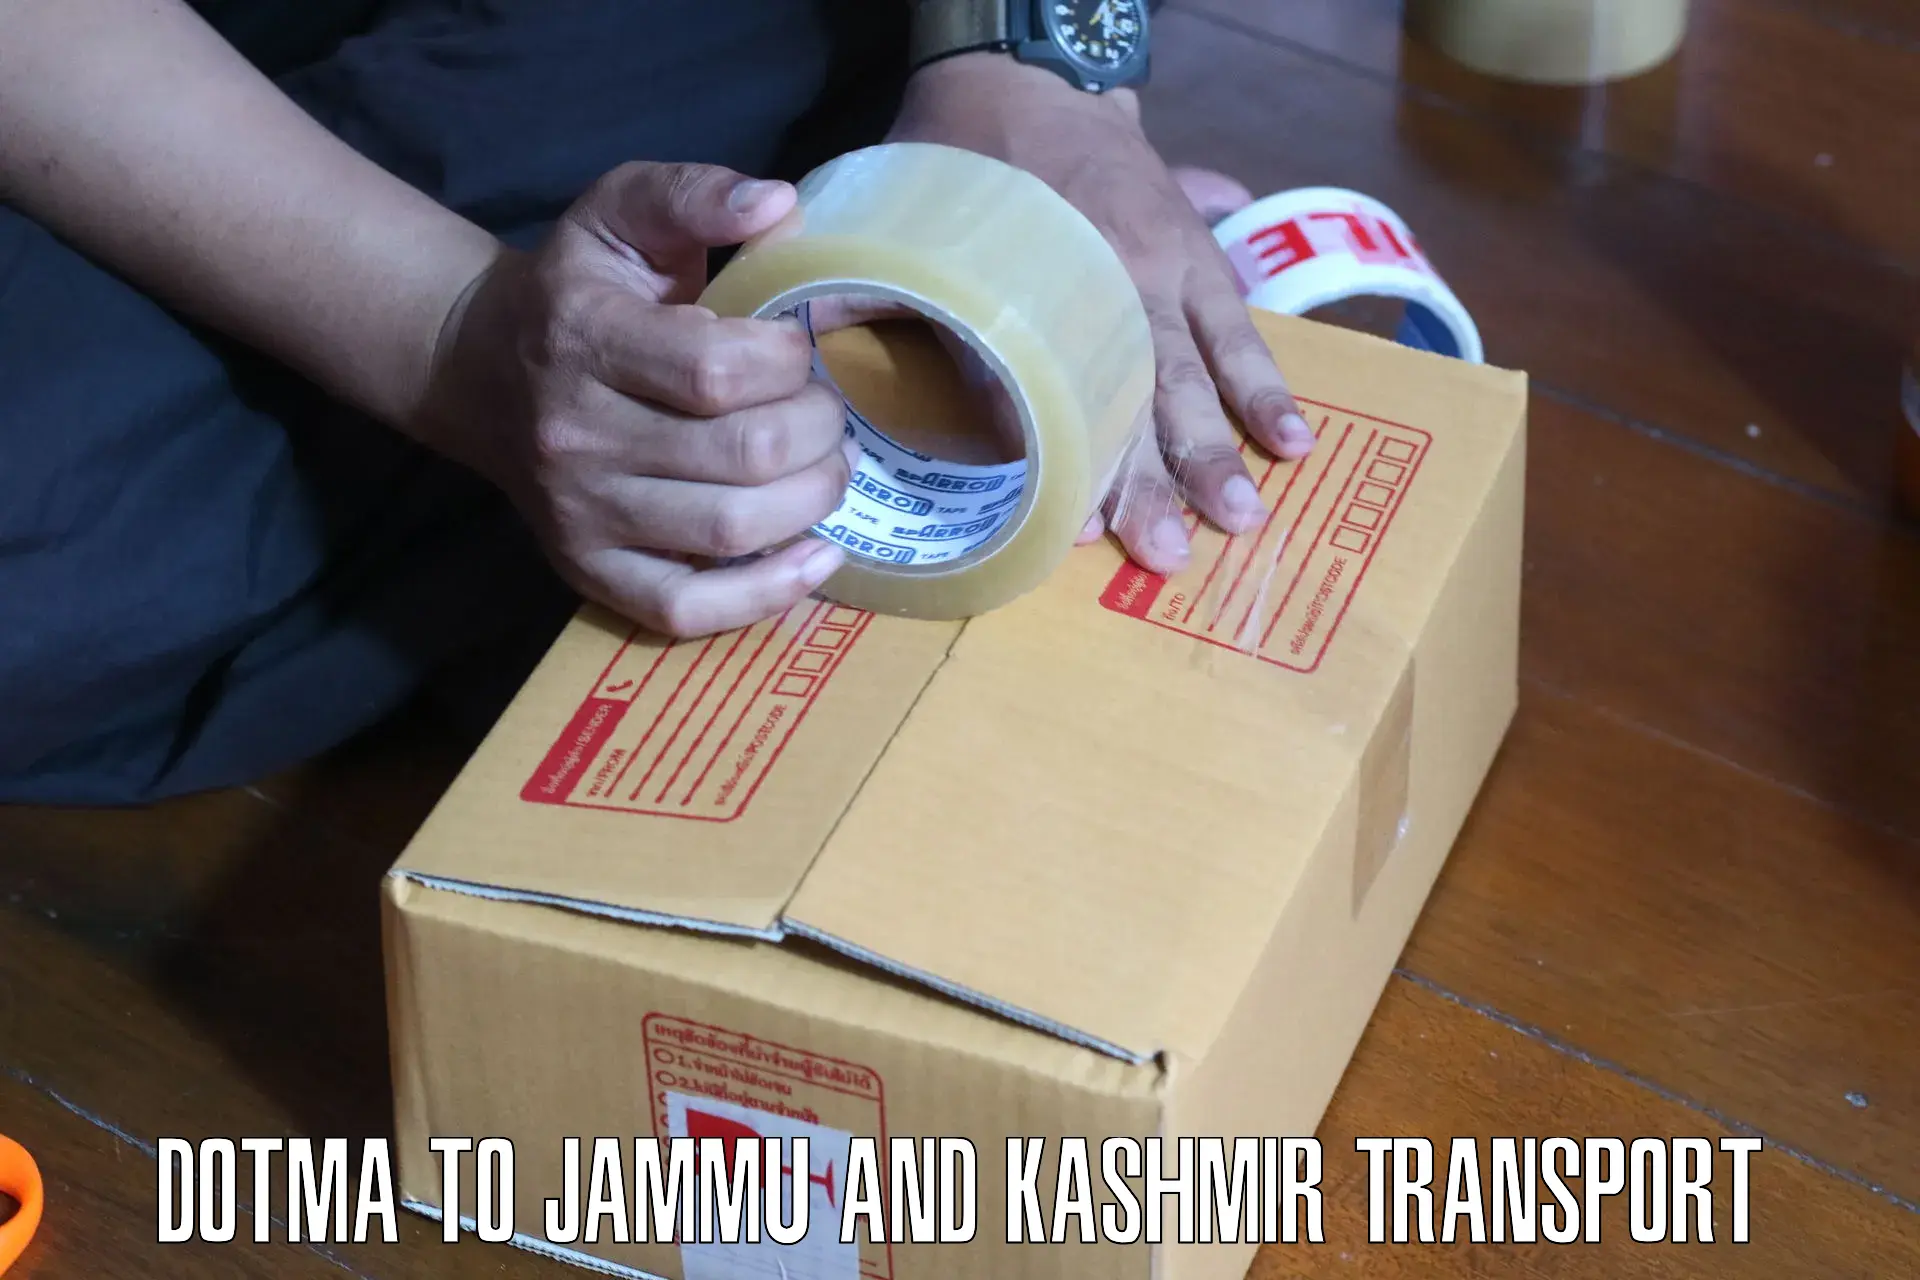 Truck transport companies in India Dotma to Baramulla